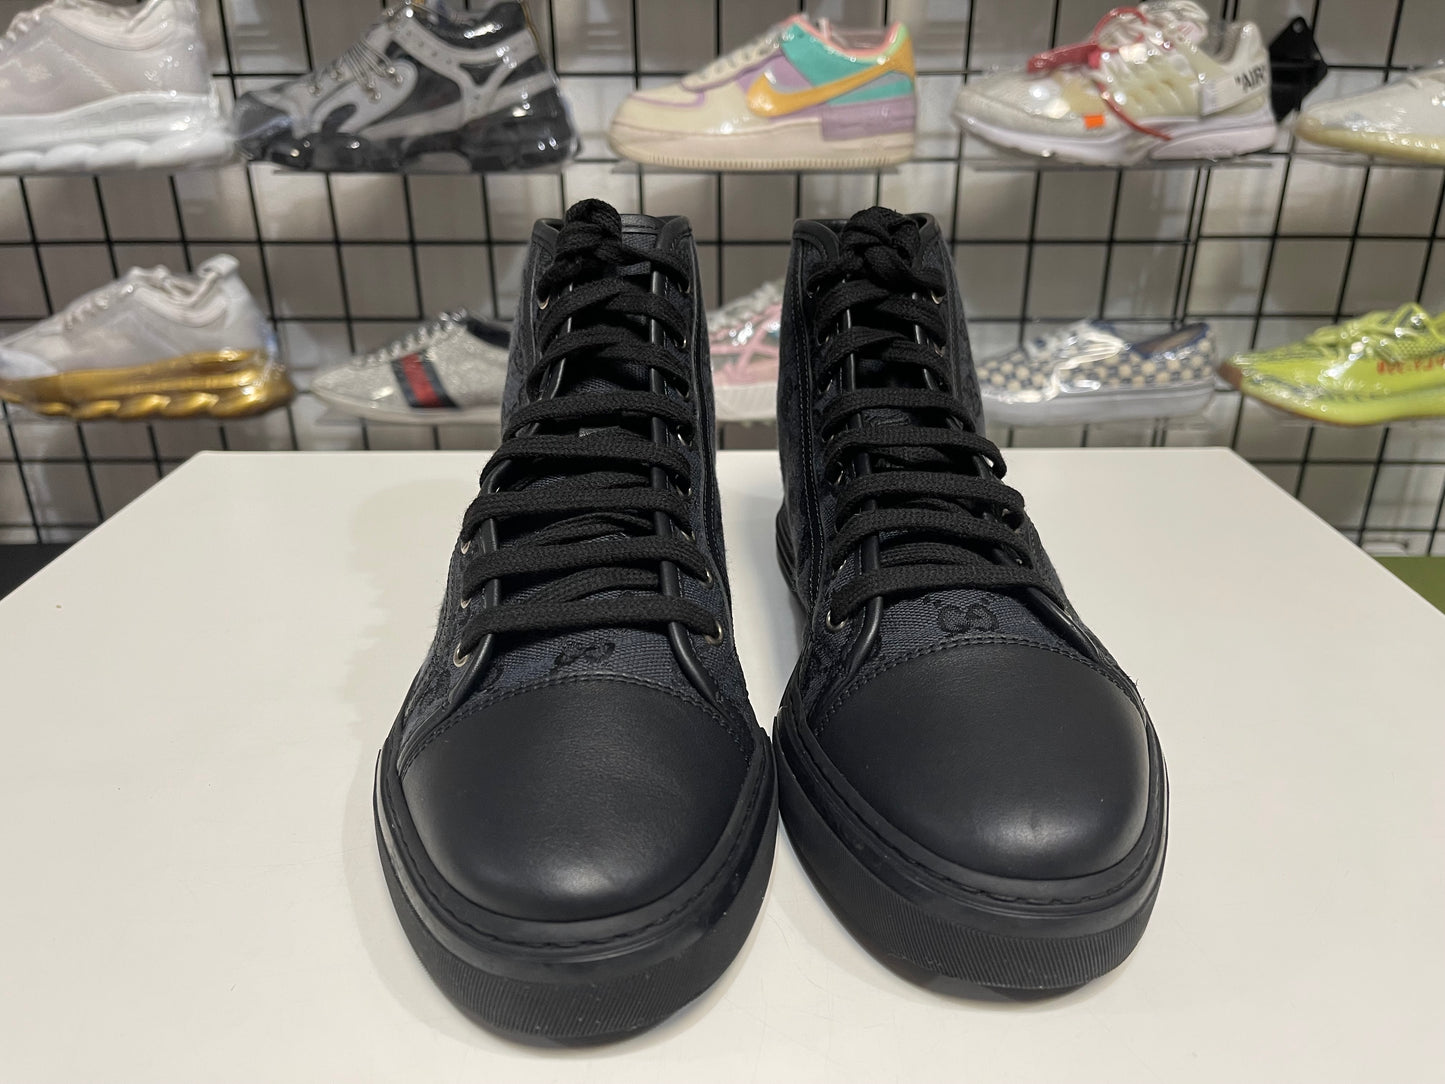 Gucci High Canvas Sneaker Size 7.5G